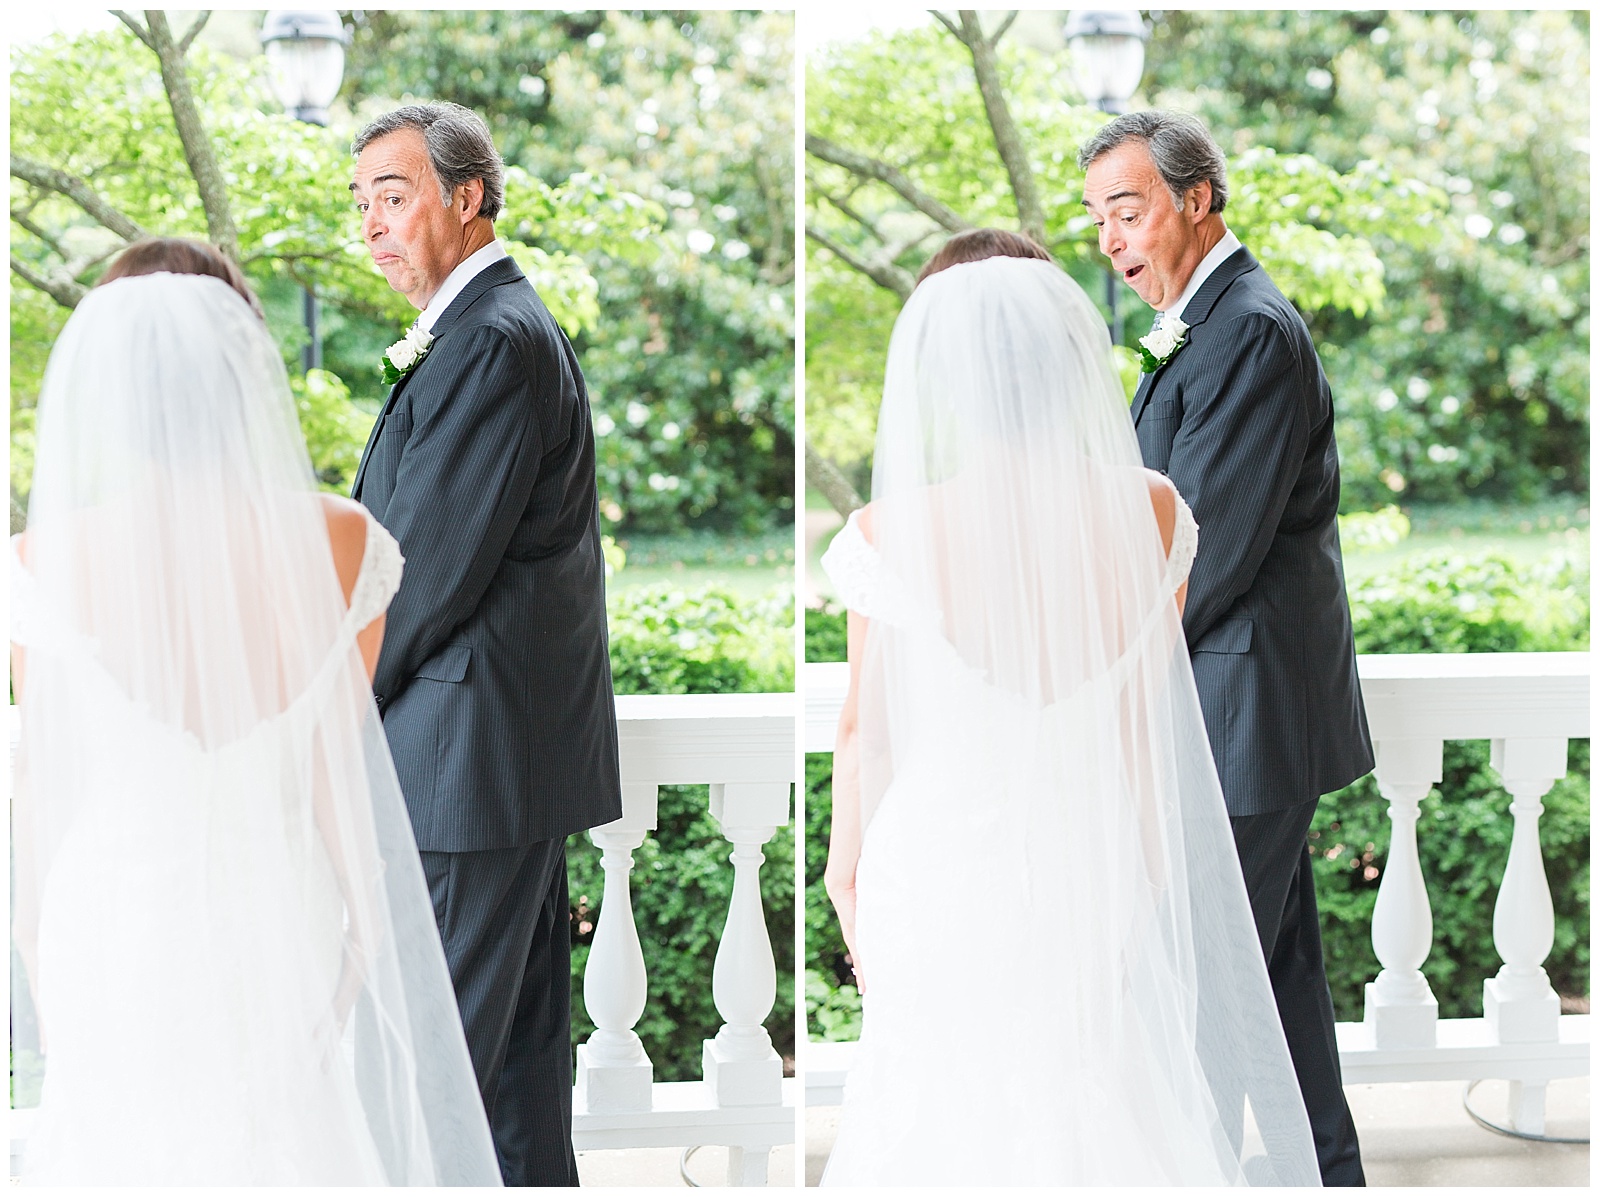 Bride chose to do a first look with her Dad and it was very sweet when he turned around to see her